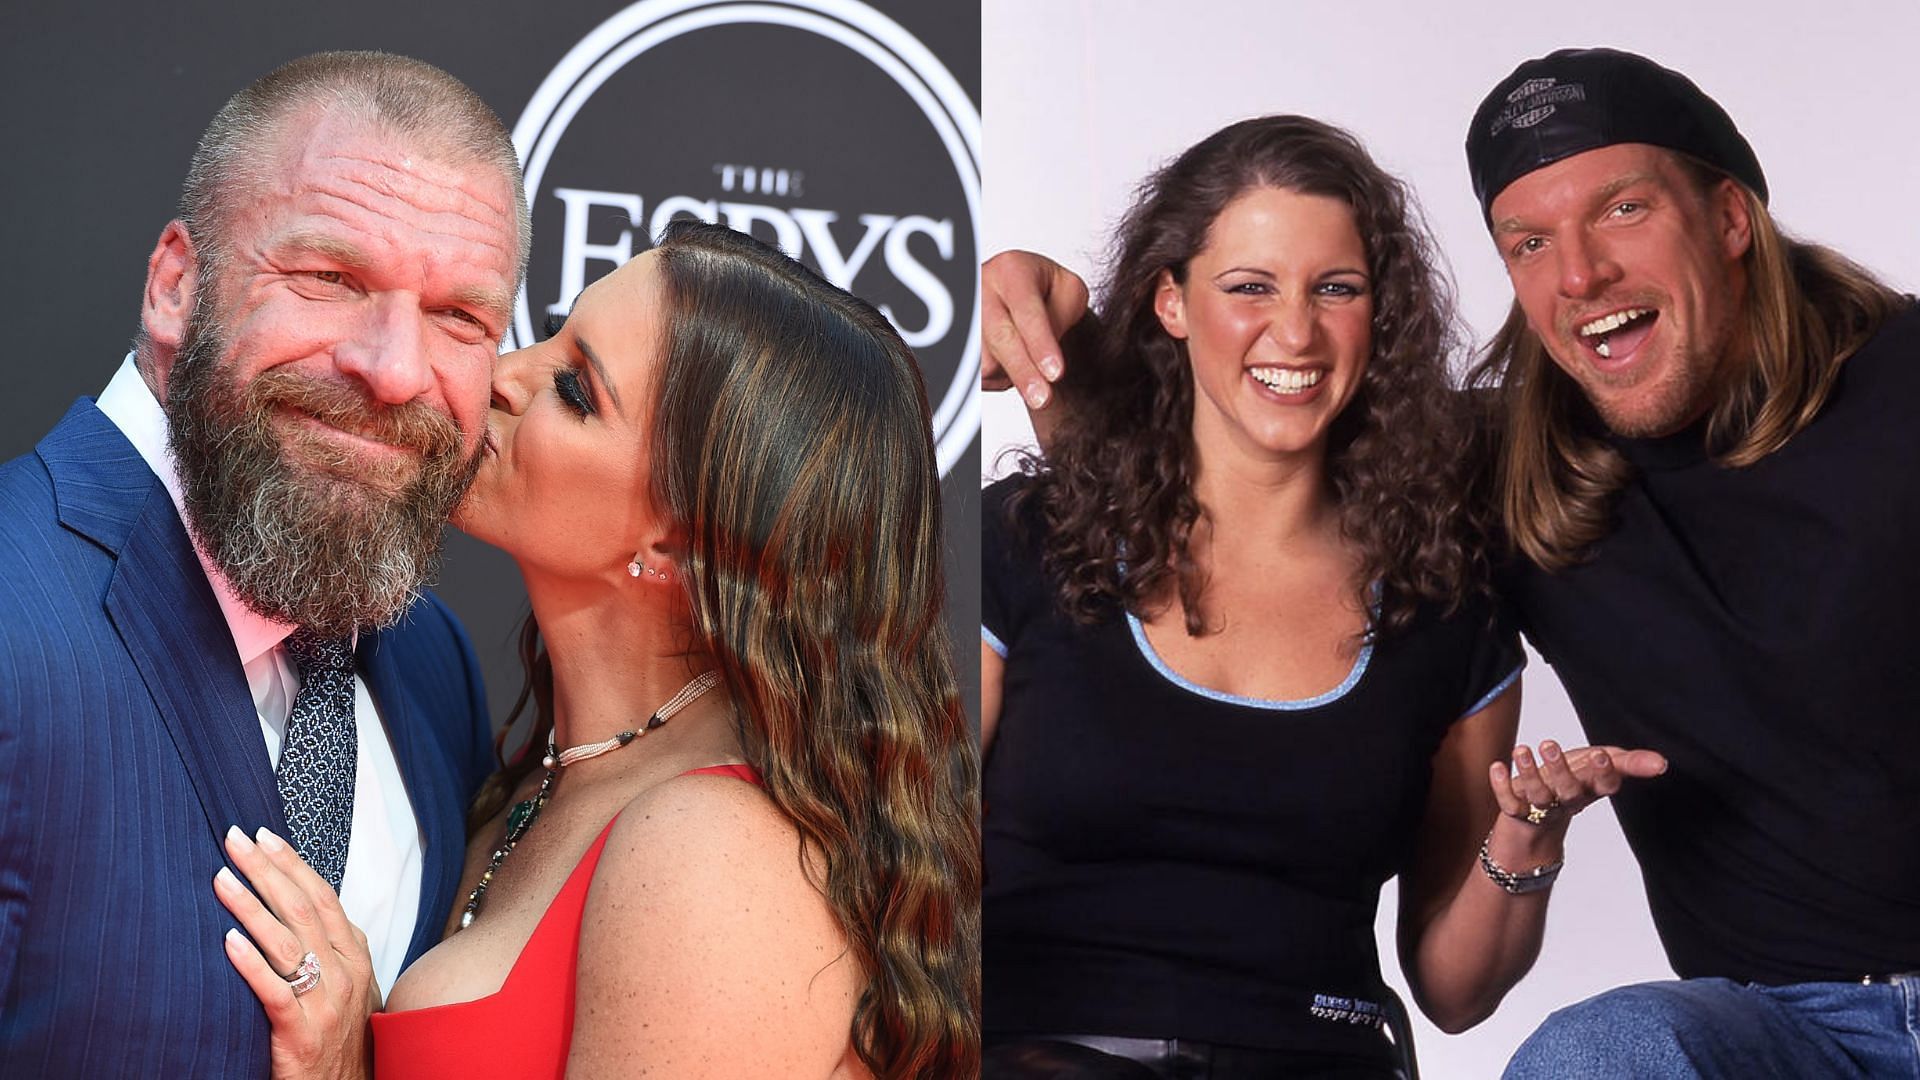 Stephanie McMahon had children with WWE legend Triple H after marrying in 2003